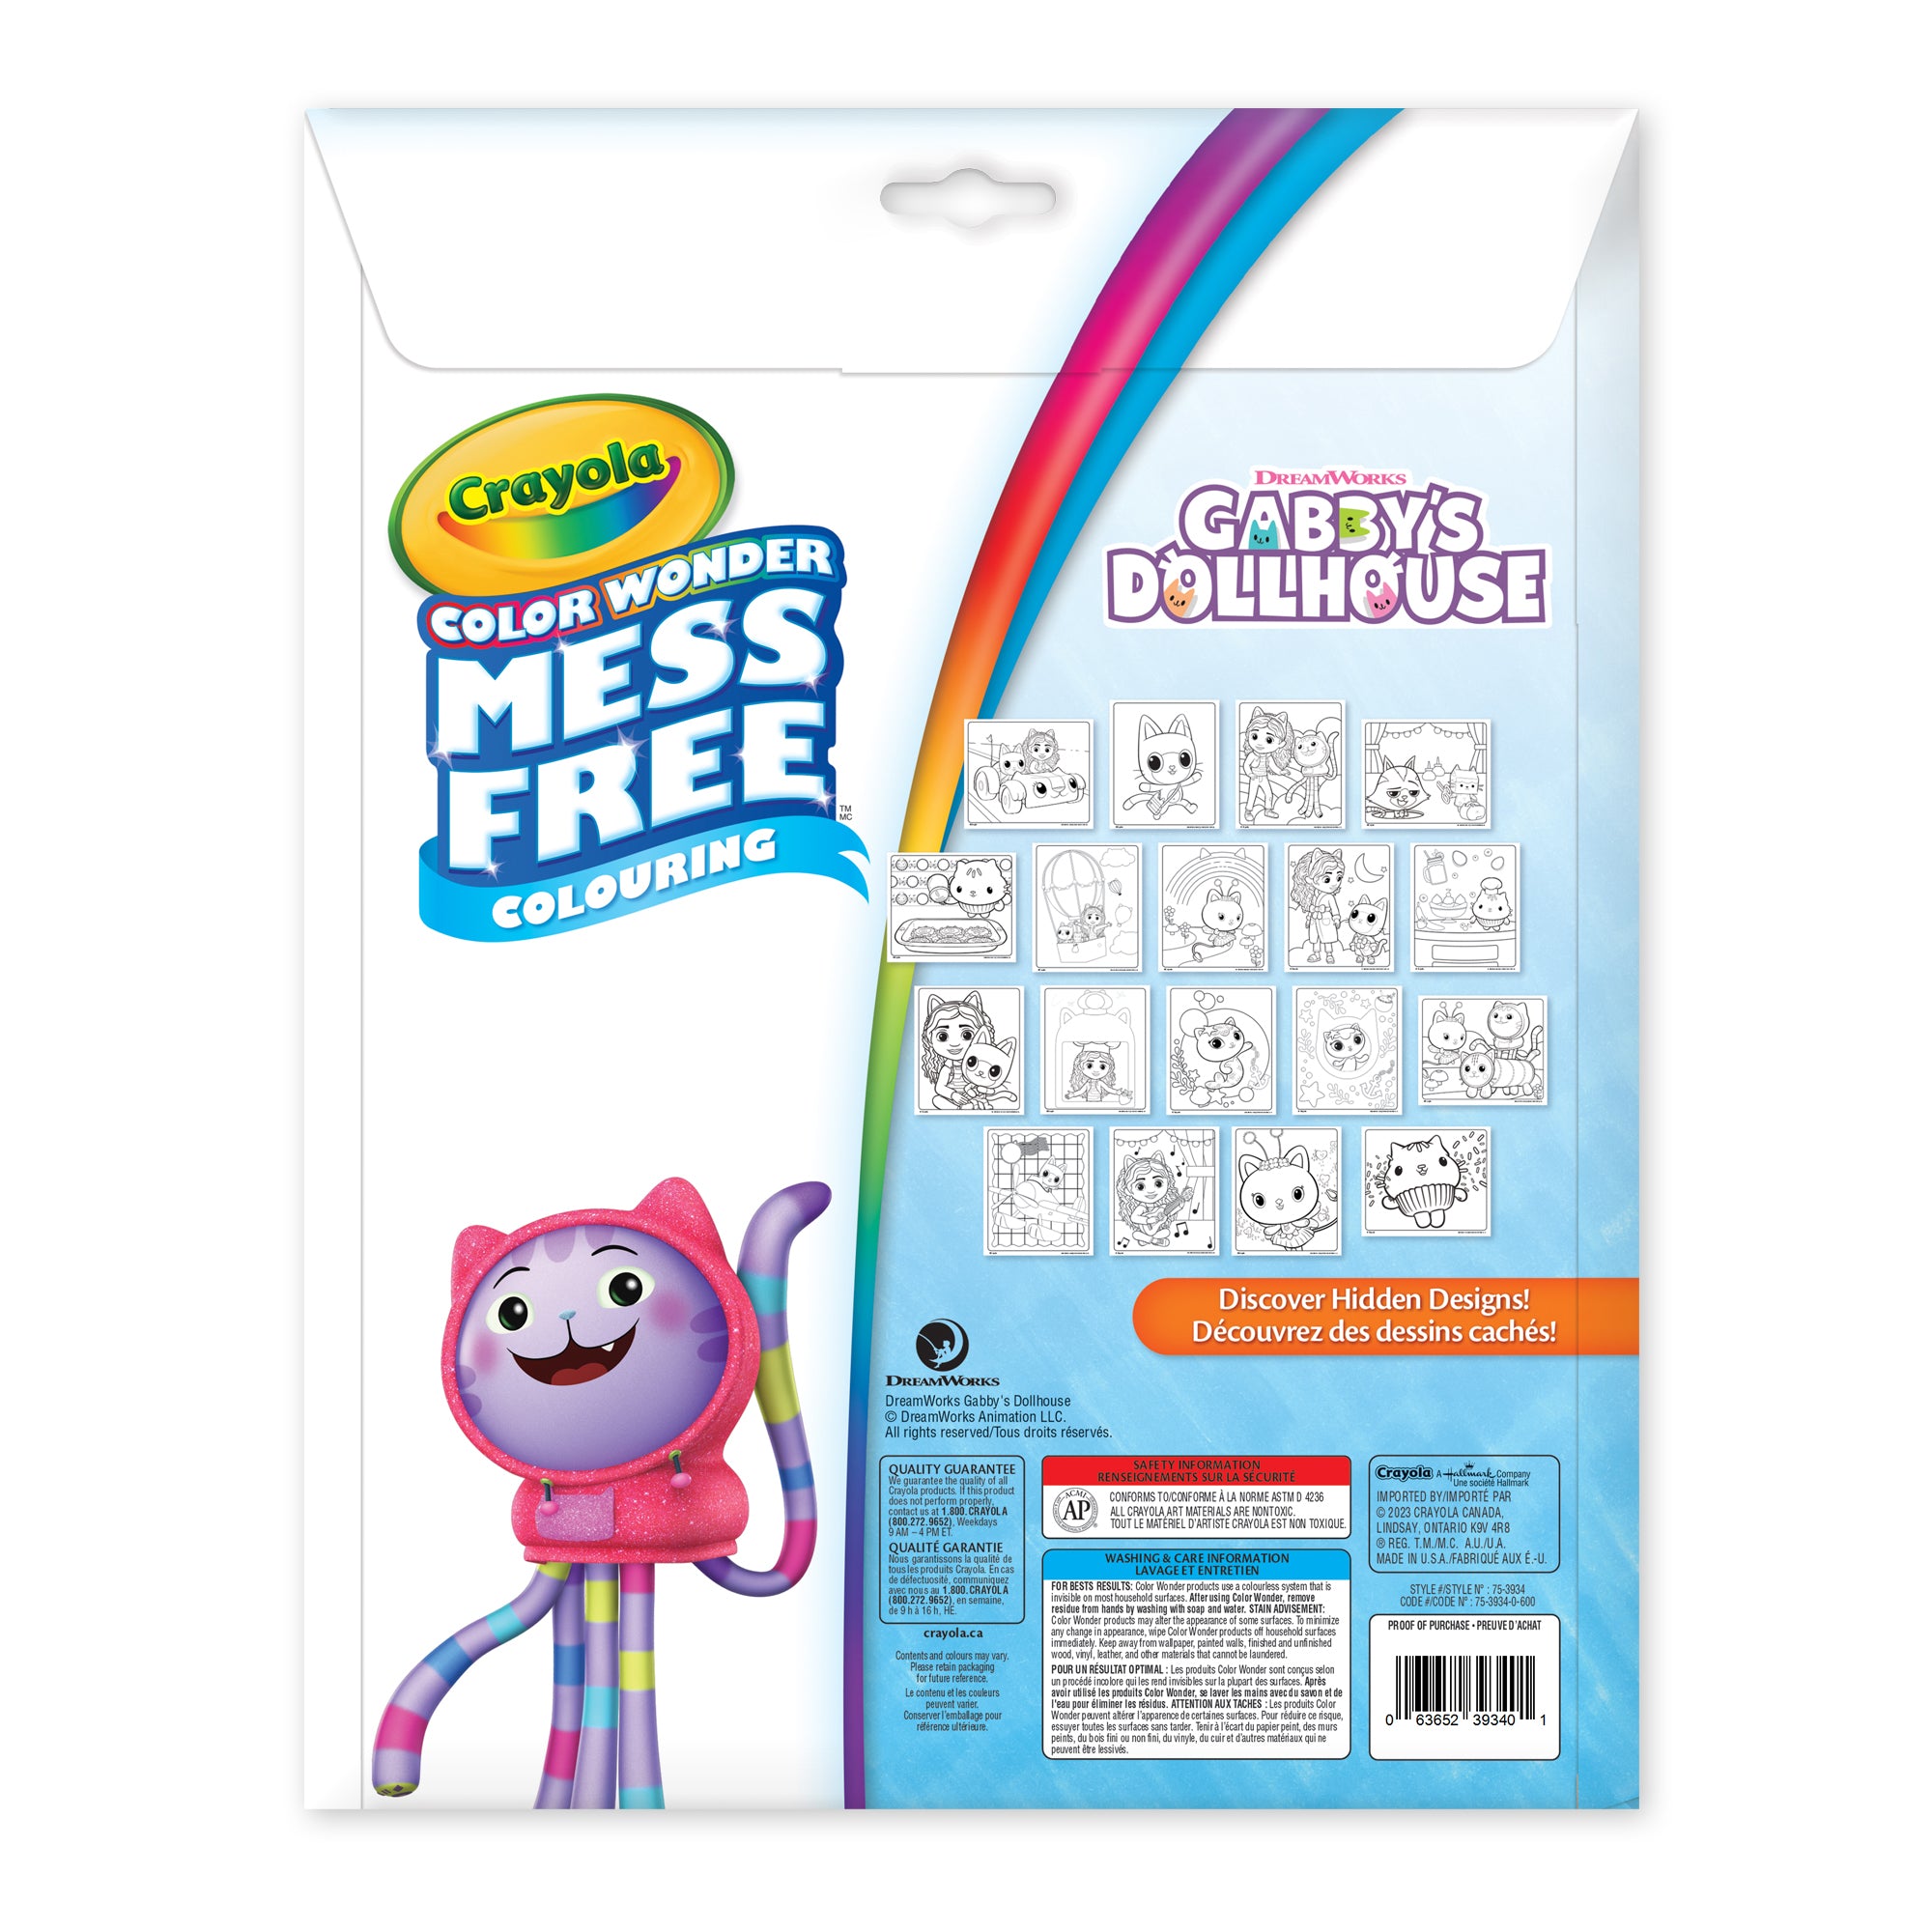 Crayola Color Wonder Mess Free Mini Markers, Classic Colors, 10